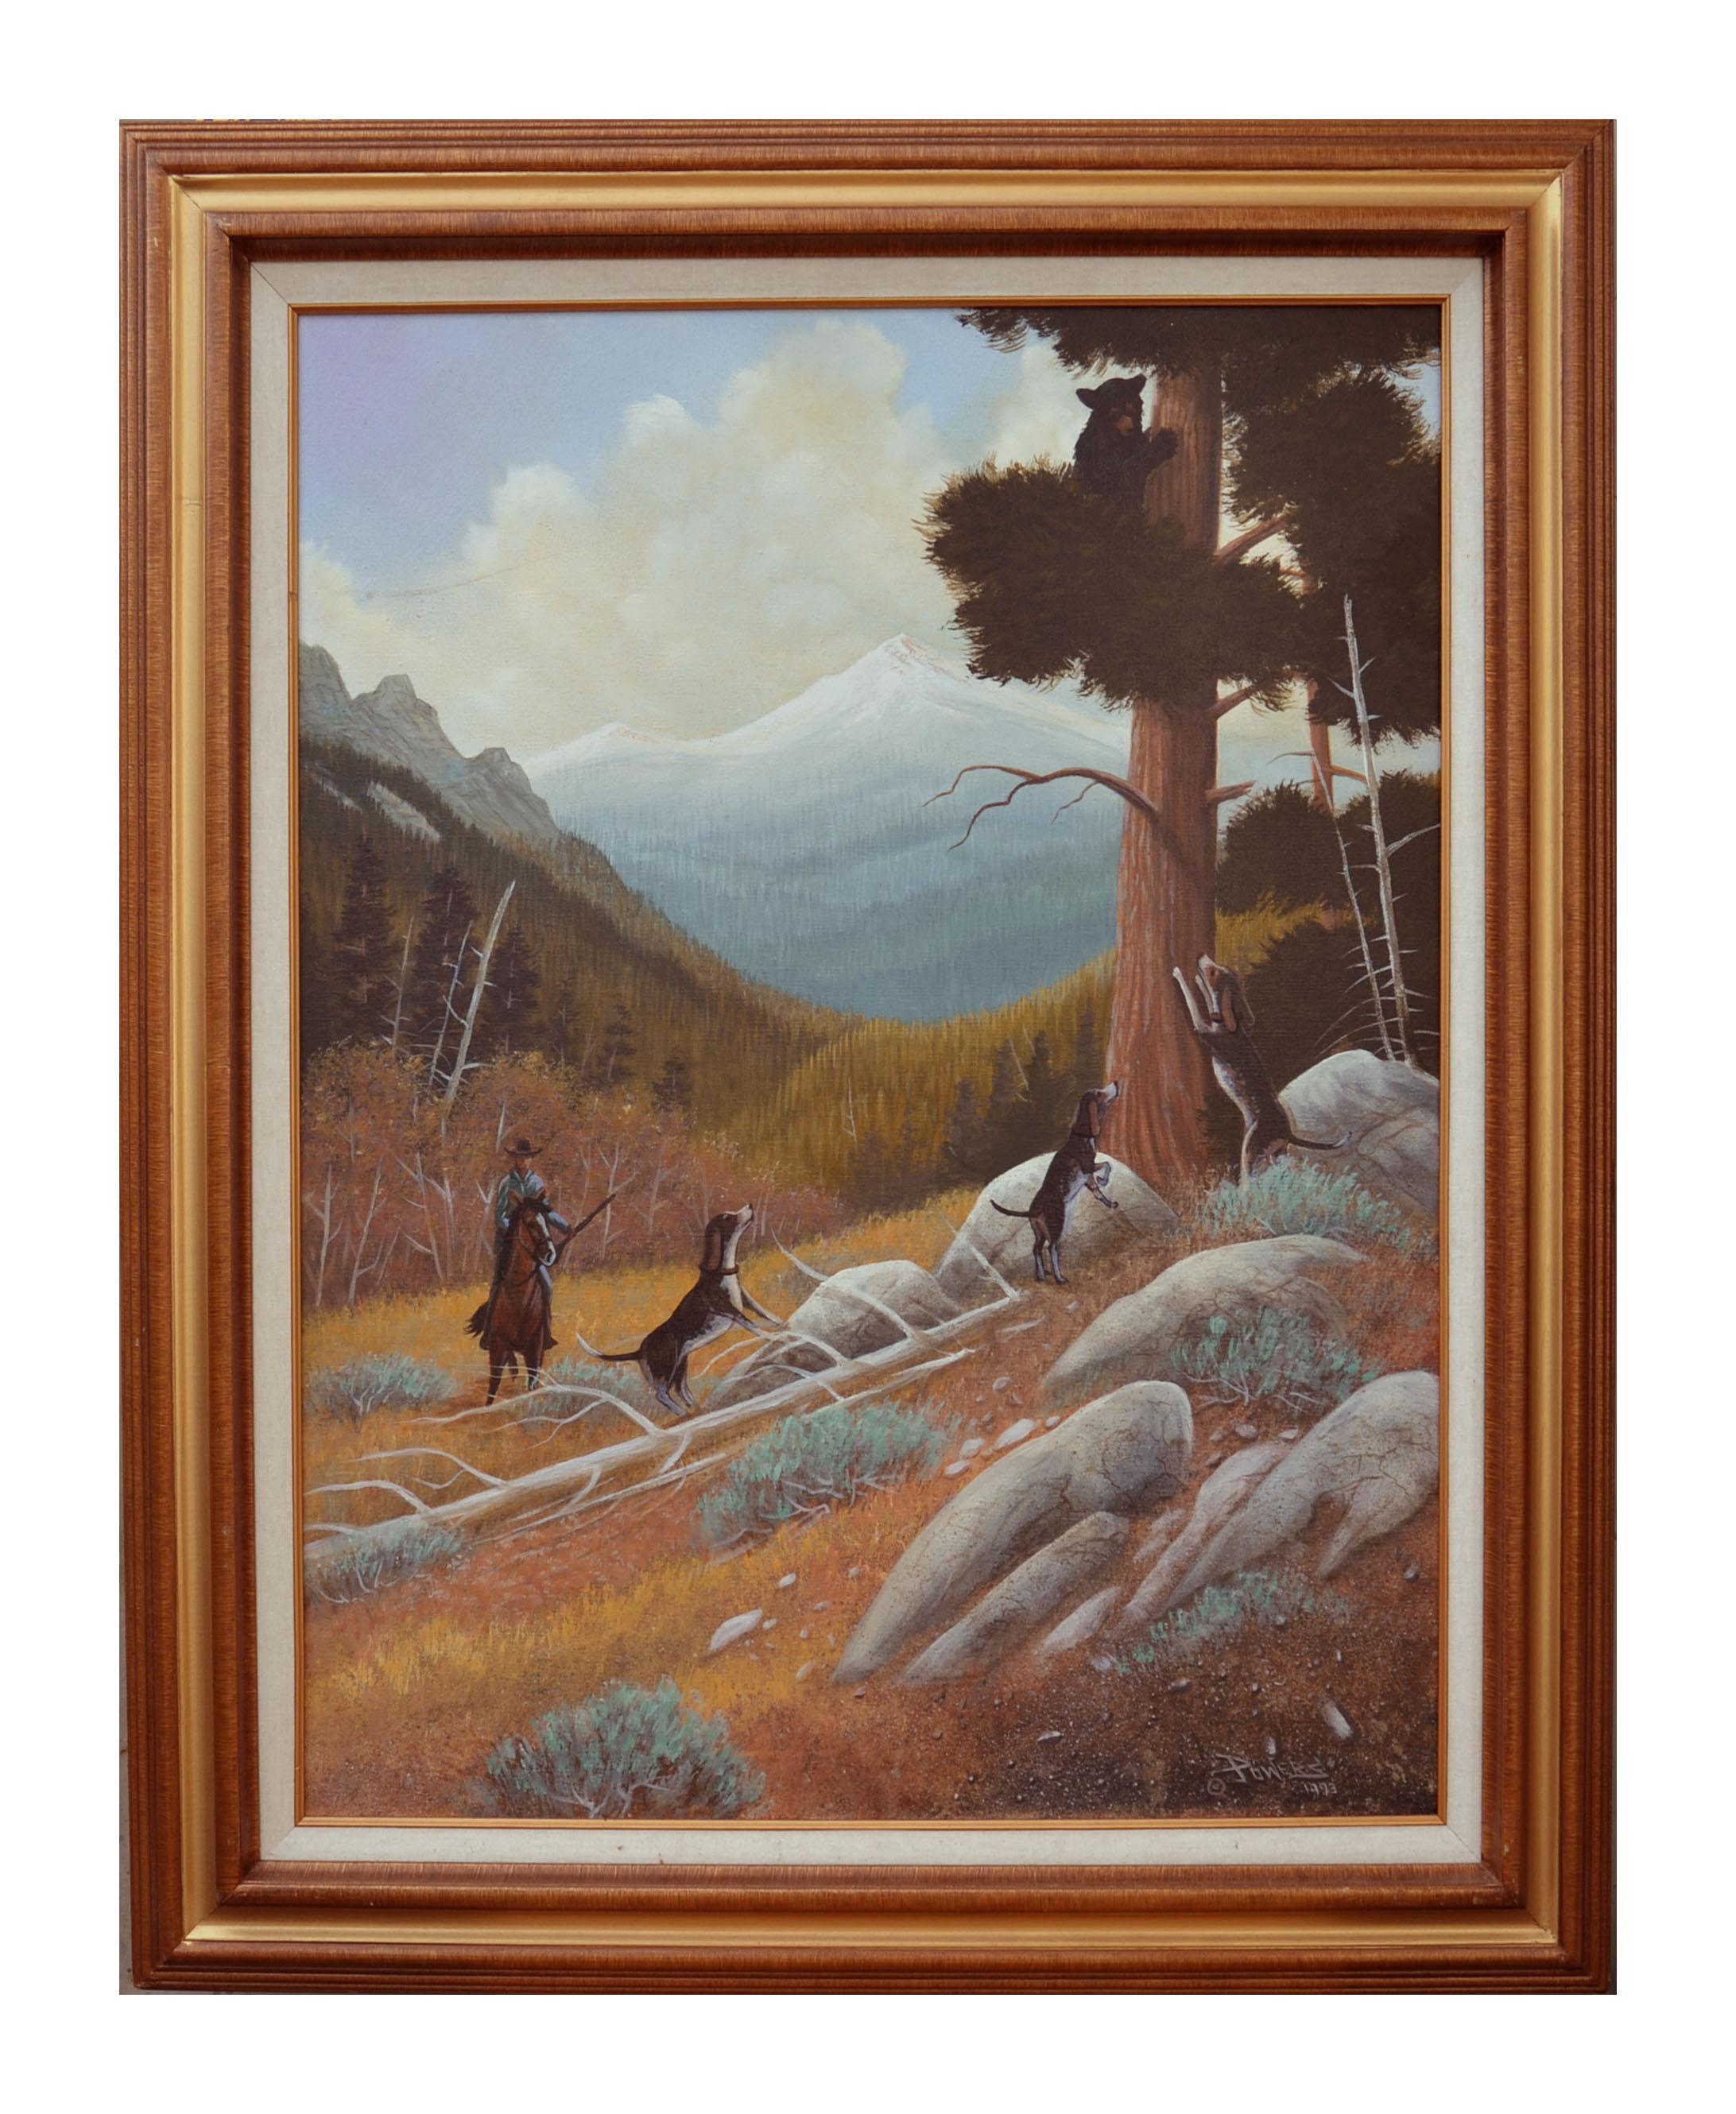 Kim L Powers Figurative Painting - Treeing Walker Coonhounds and Bear - Figurative Landscape 